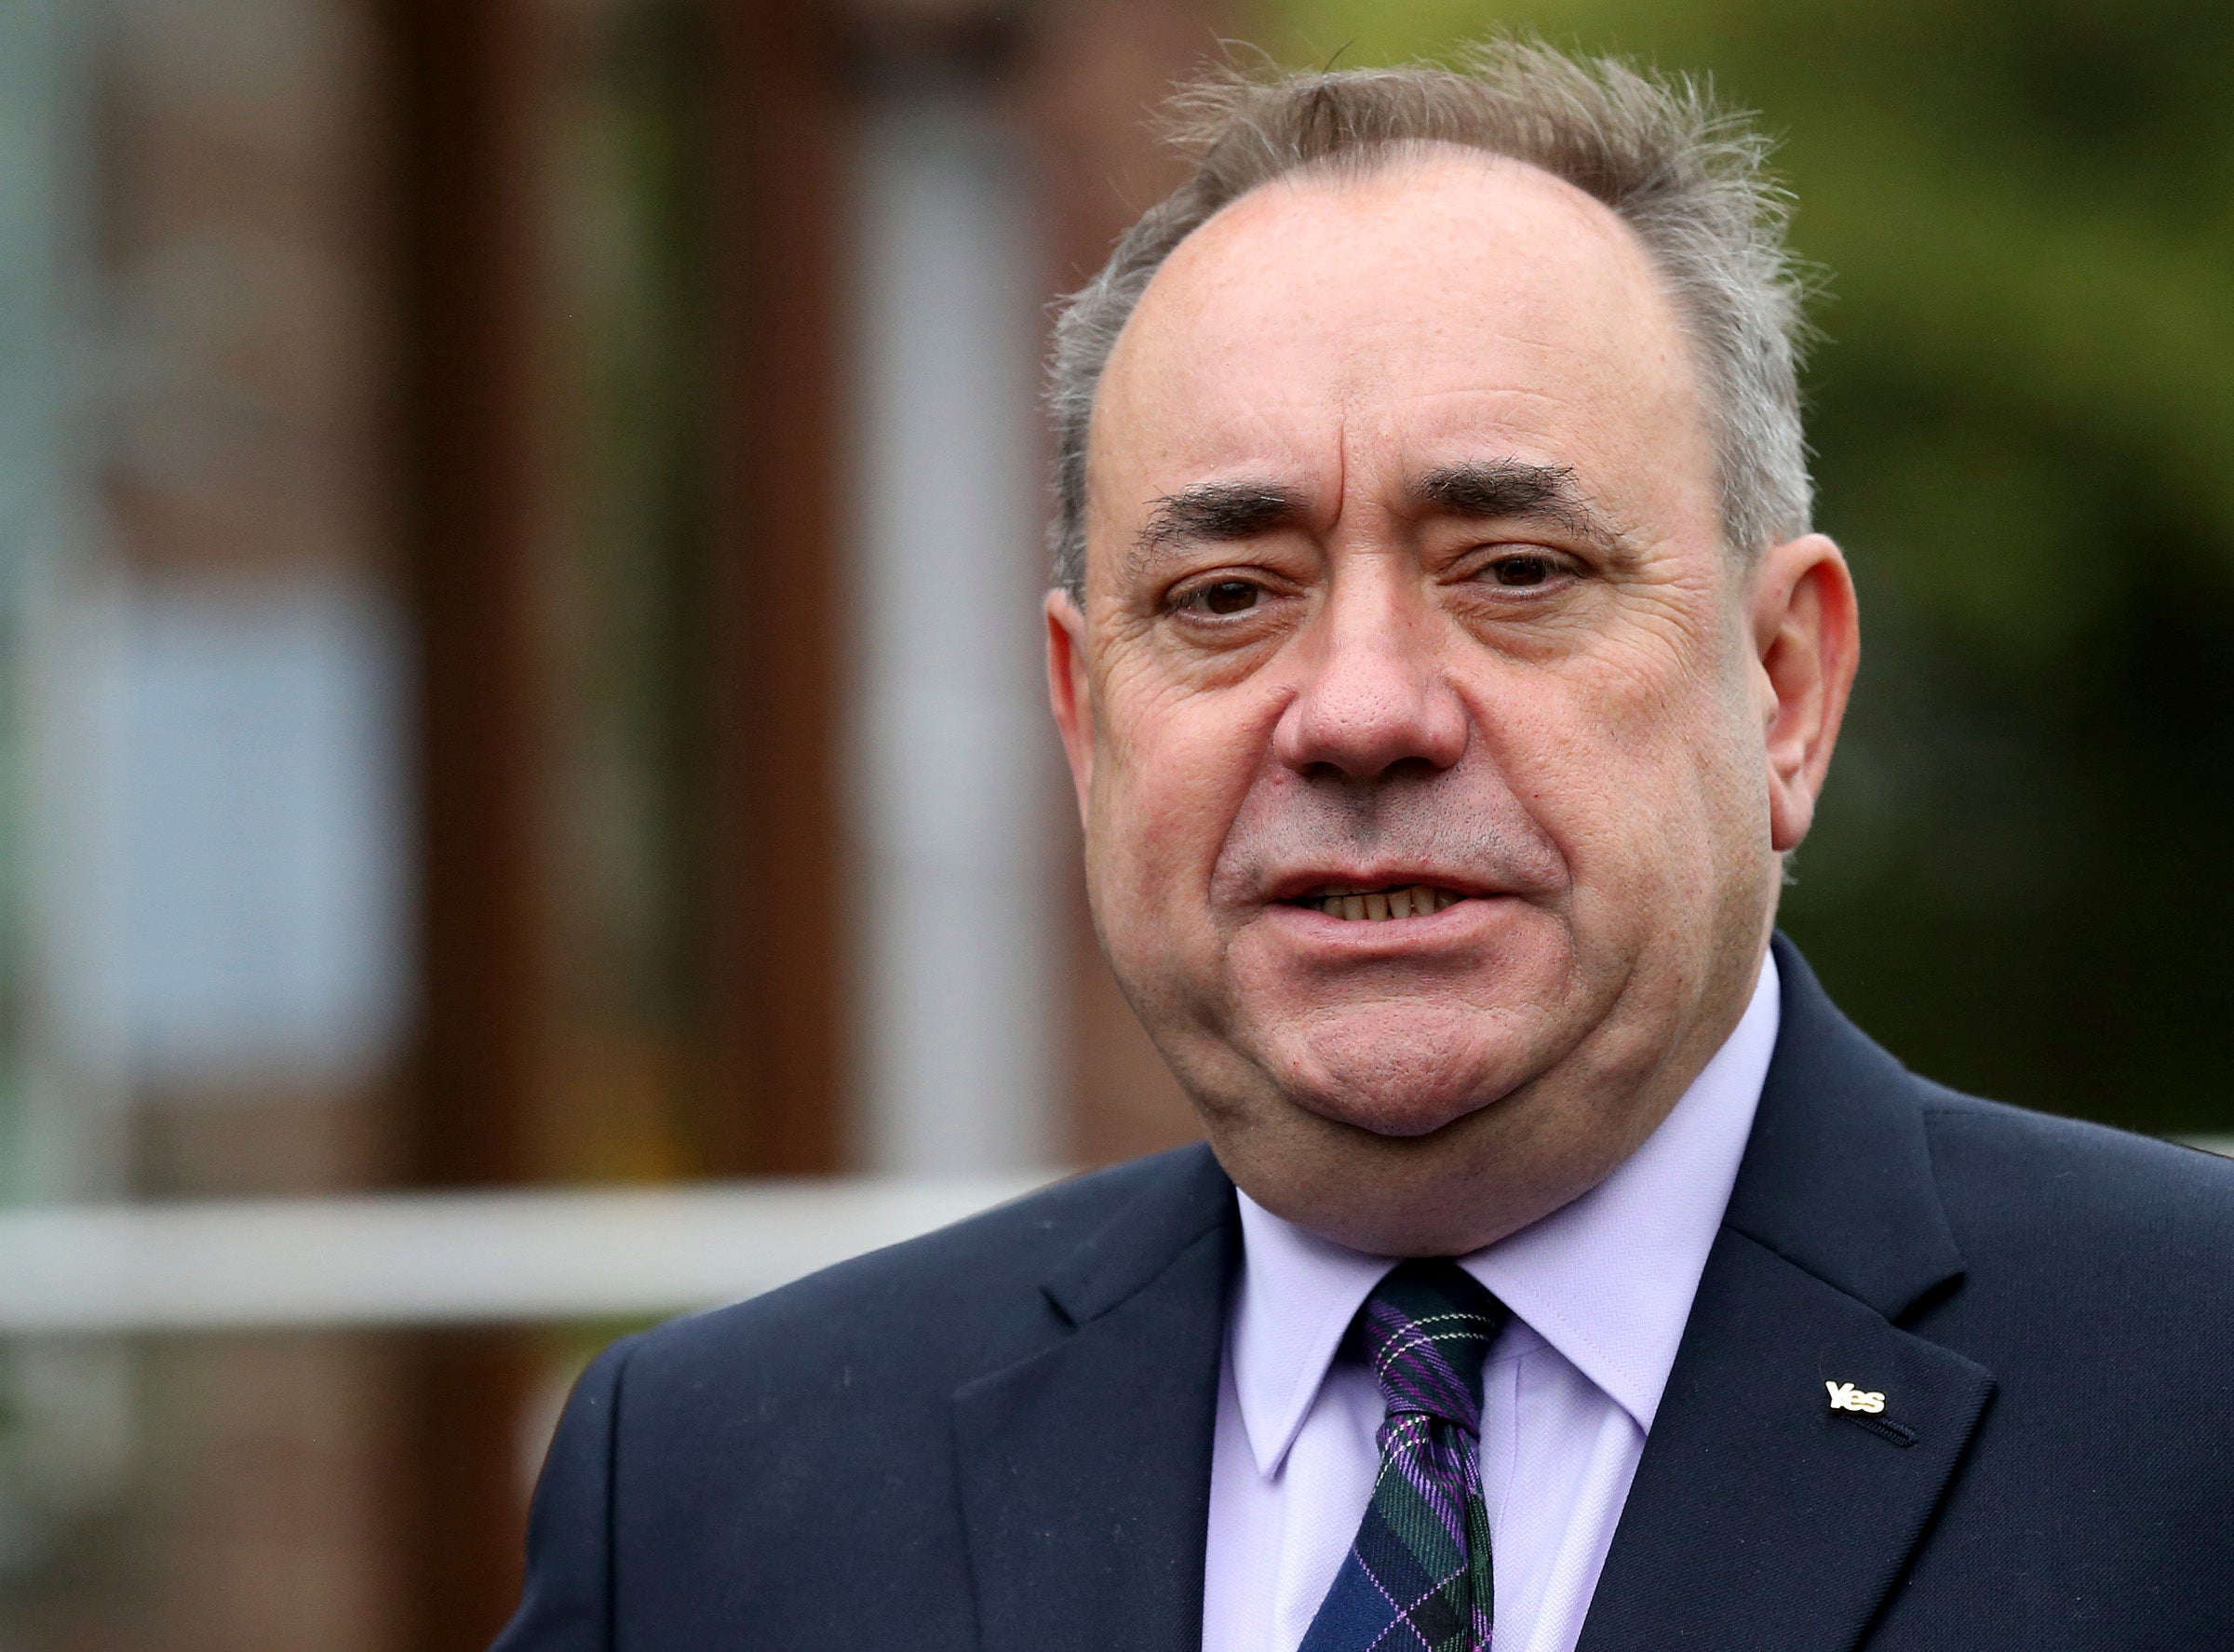 The former SNP leader has said he will be writing to regulator Ofcom as well as broadcasters